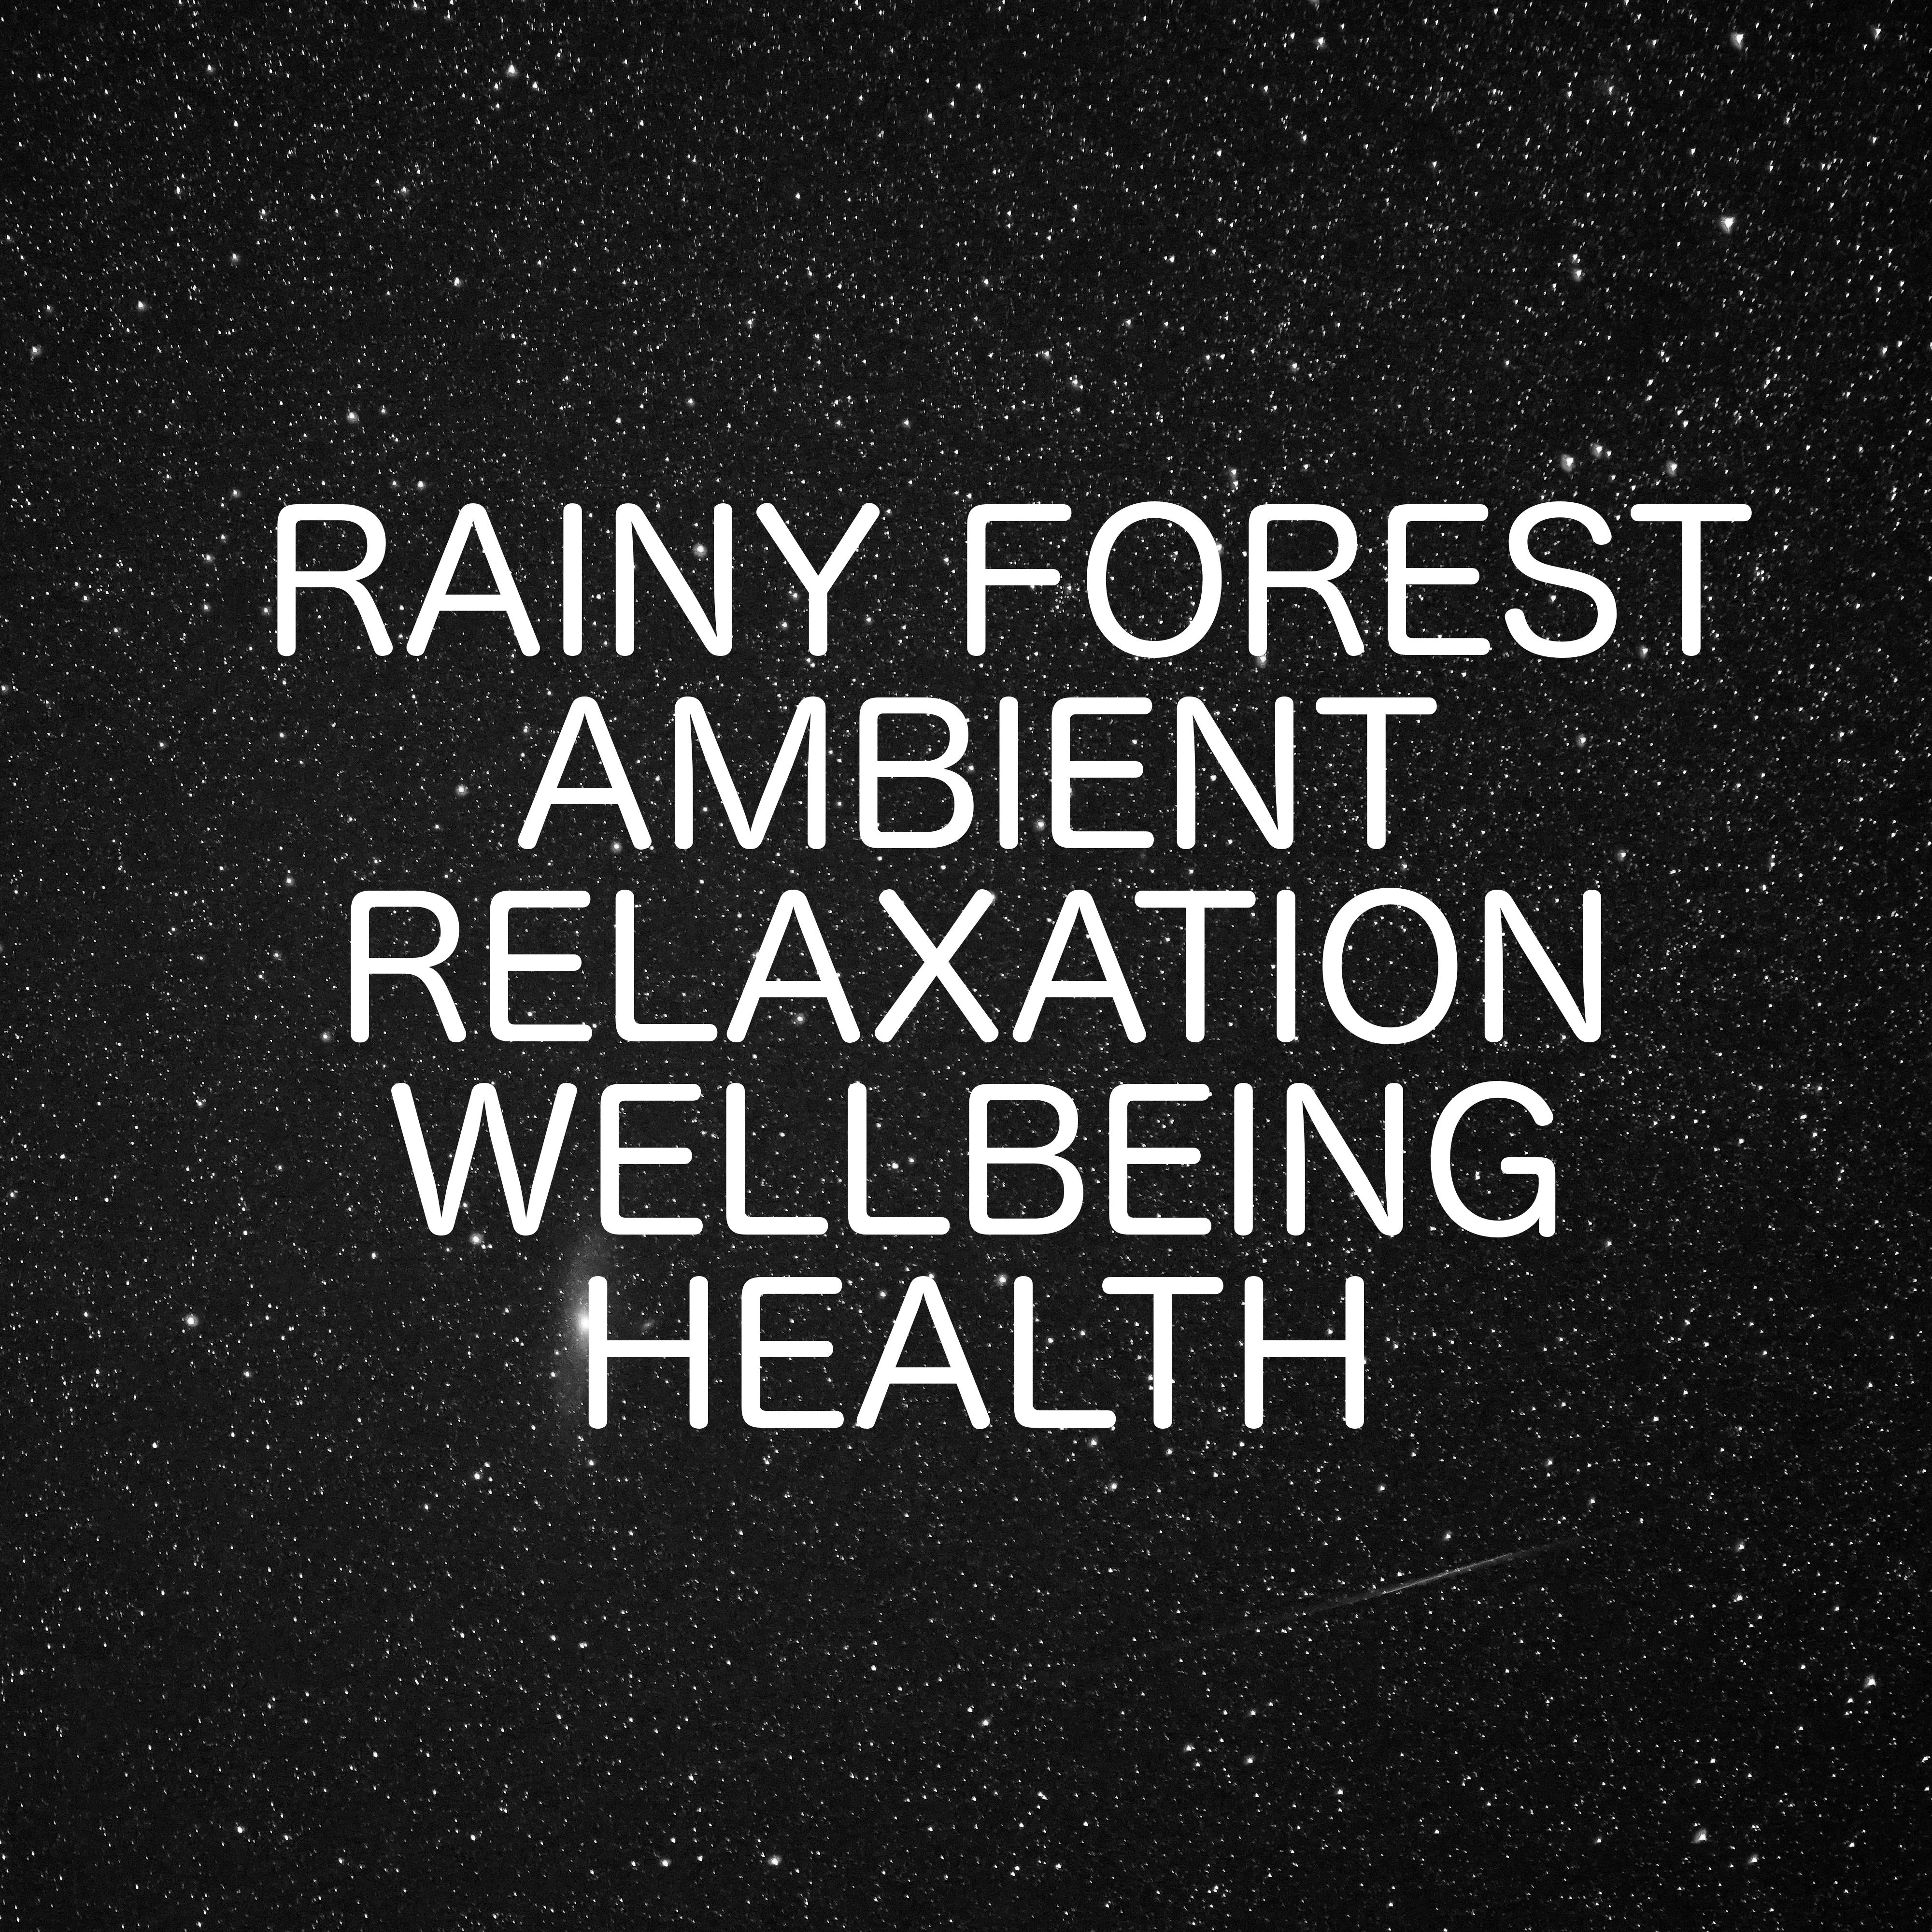 Forest Rain - Ambient Relaxation Wellbeing Health